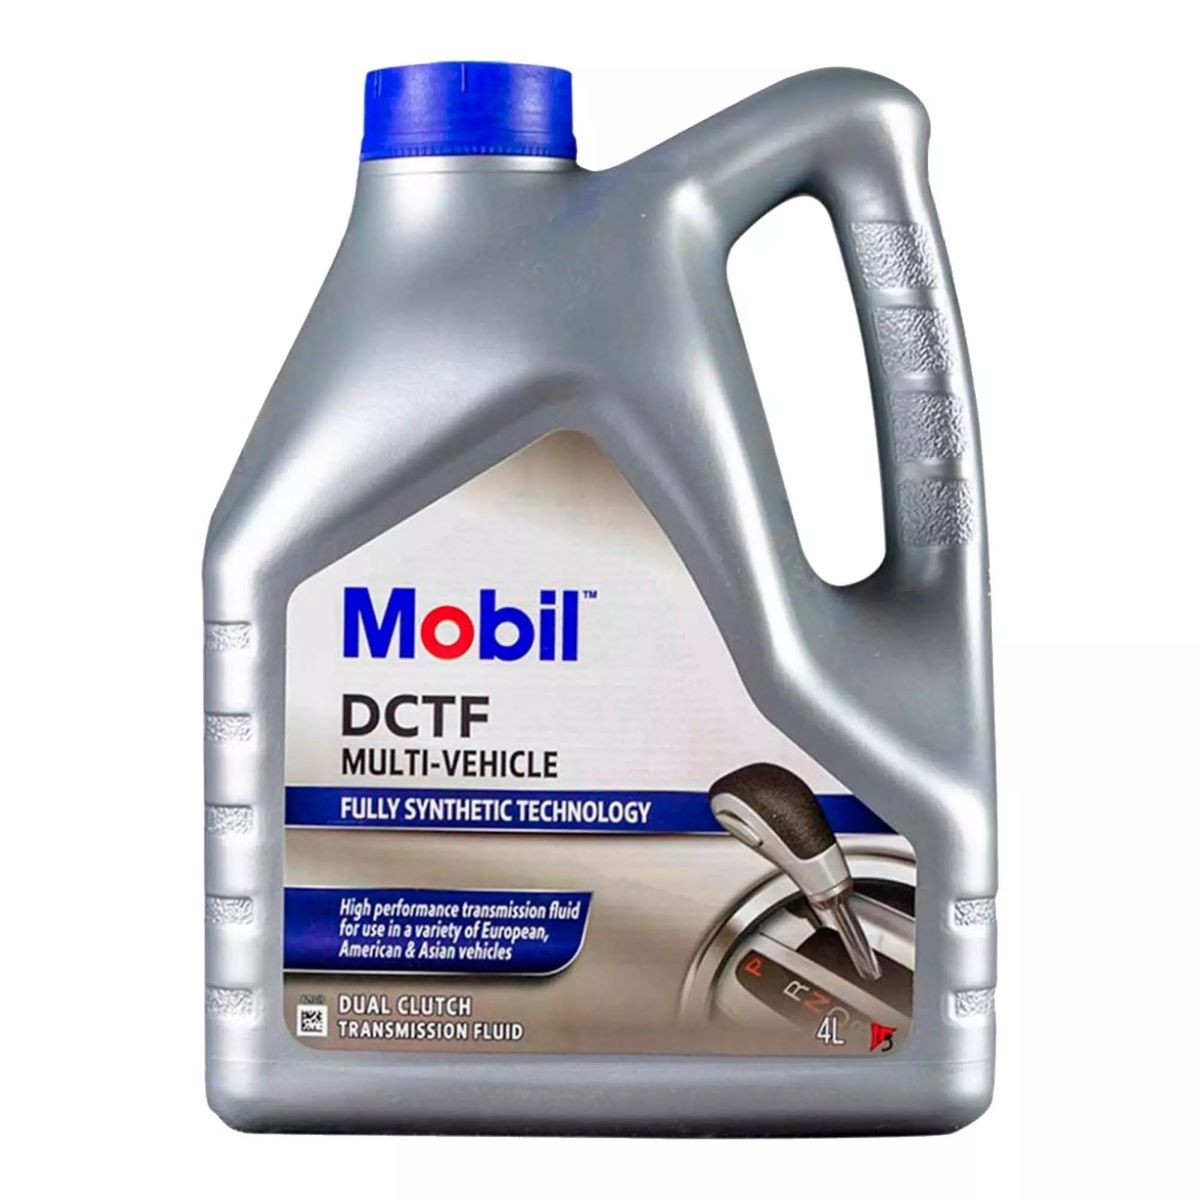 MOBIL DCTF Multi-Vehicle 156315 Atf Ford Focus Mk3 2.0 150 hp Petrol 2020 price